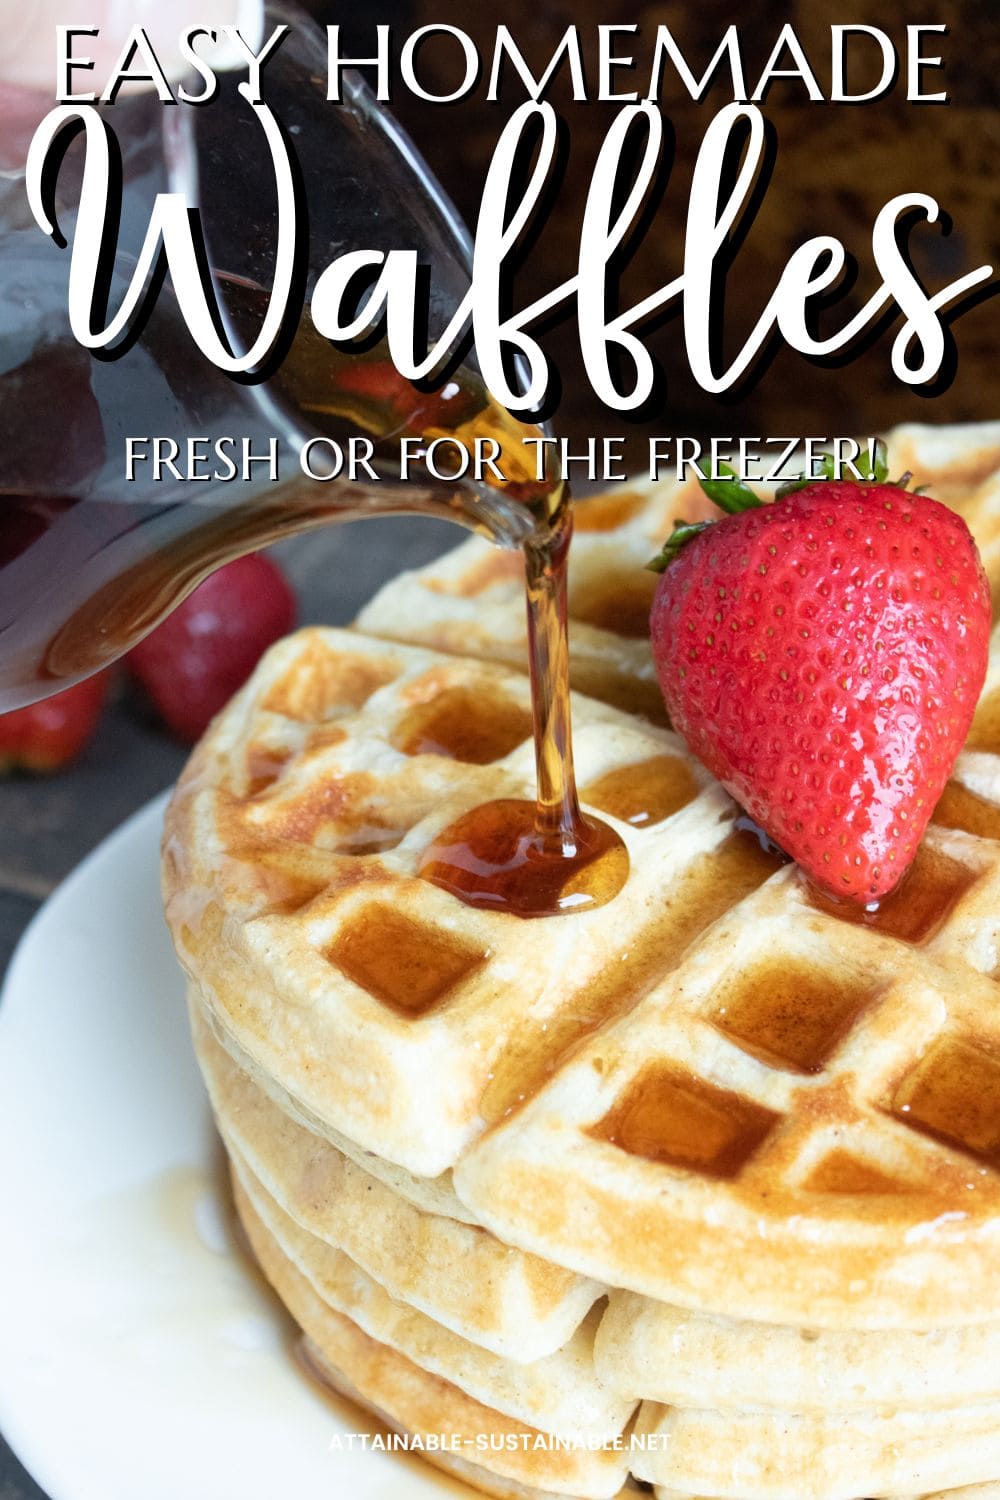 syrup being poured on a stack of waffles with a whole strawberry on top.